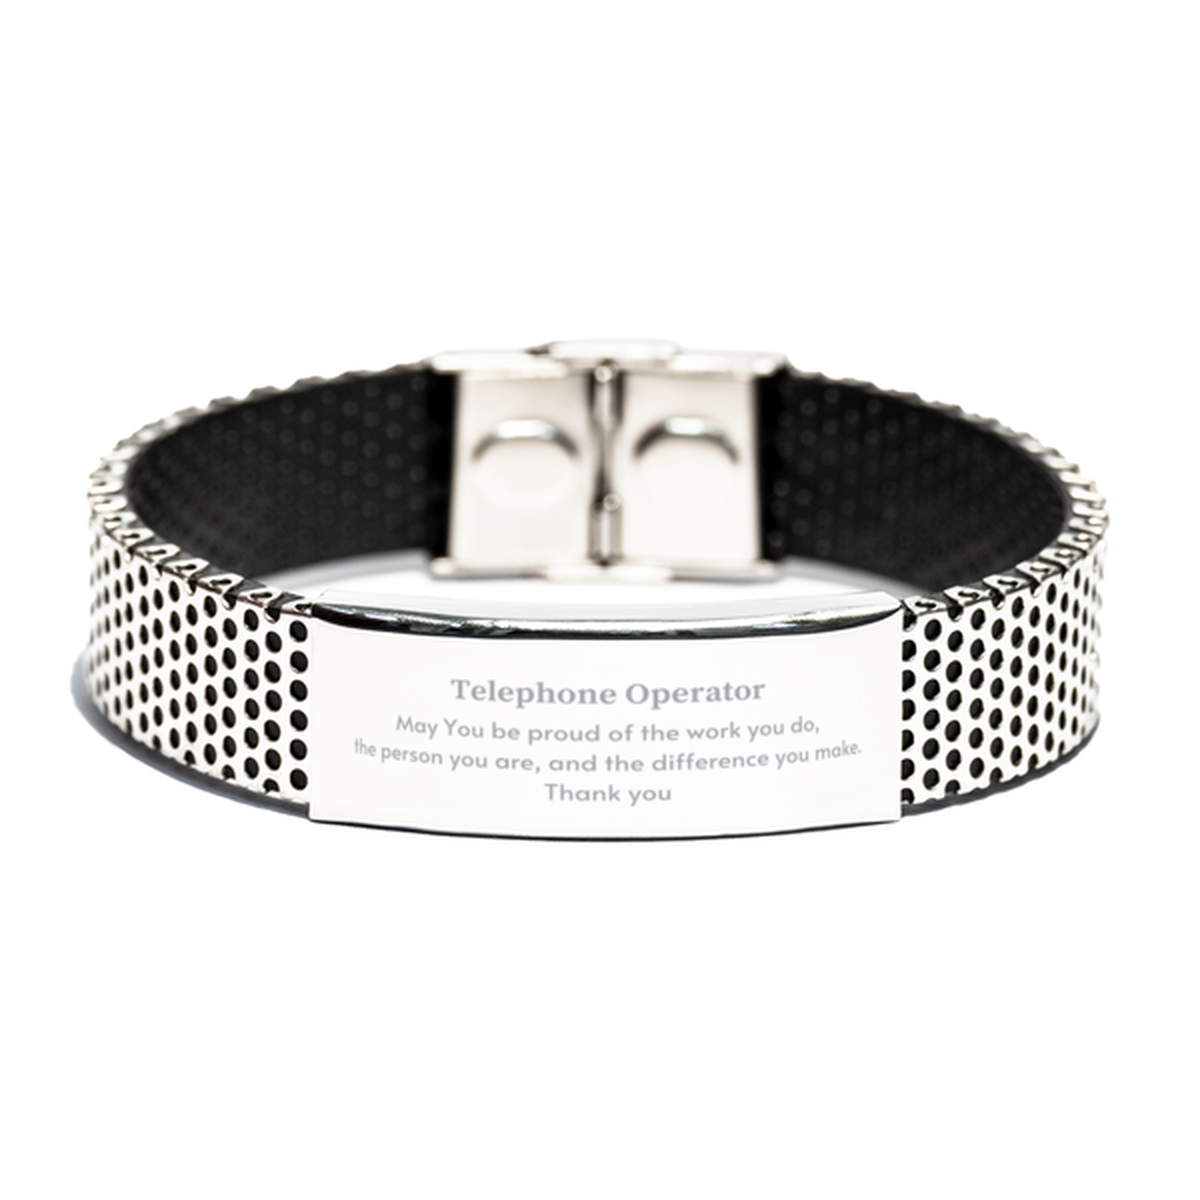 Heartwarming Stainless Steel Bracelet Retirement Coworkers Gifts for Telephone Operator, Telephone Operator May You be proud of the work you do, the person you are Gifts for Boss Men Women Friends